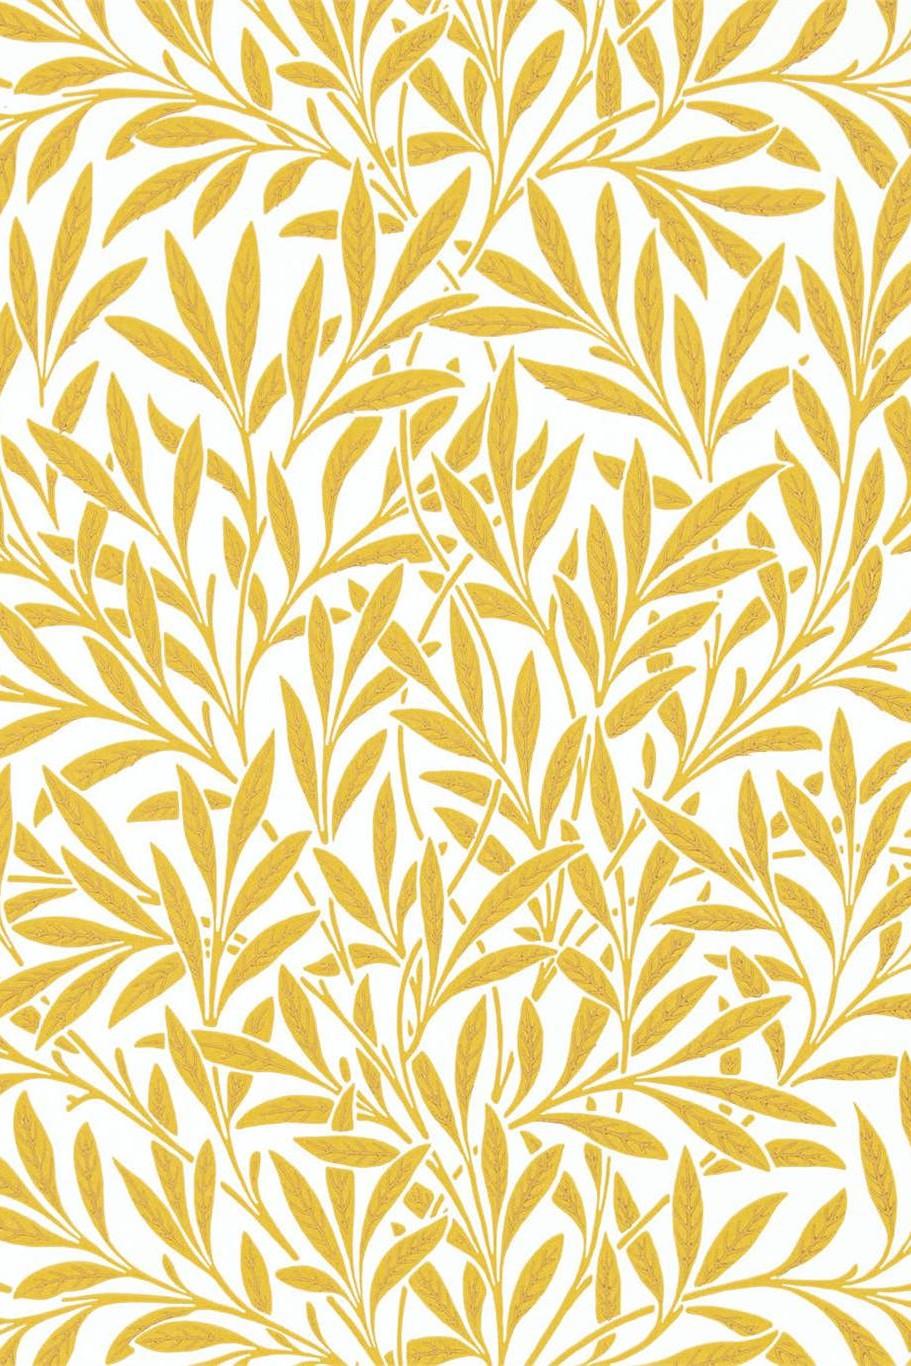 morris-co-queen-square-willow-wallpaper-dbpw216963